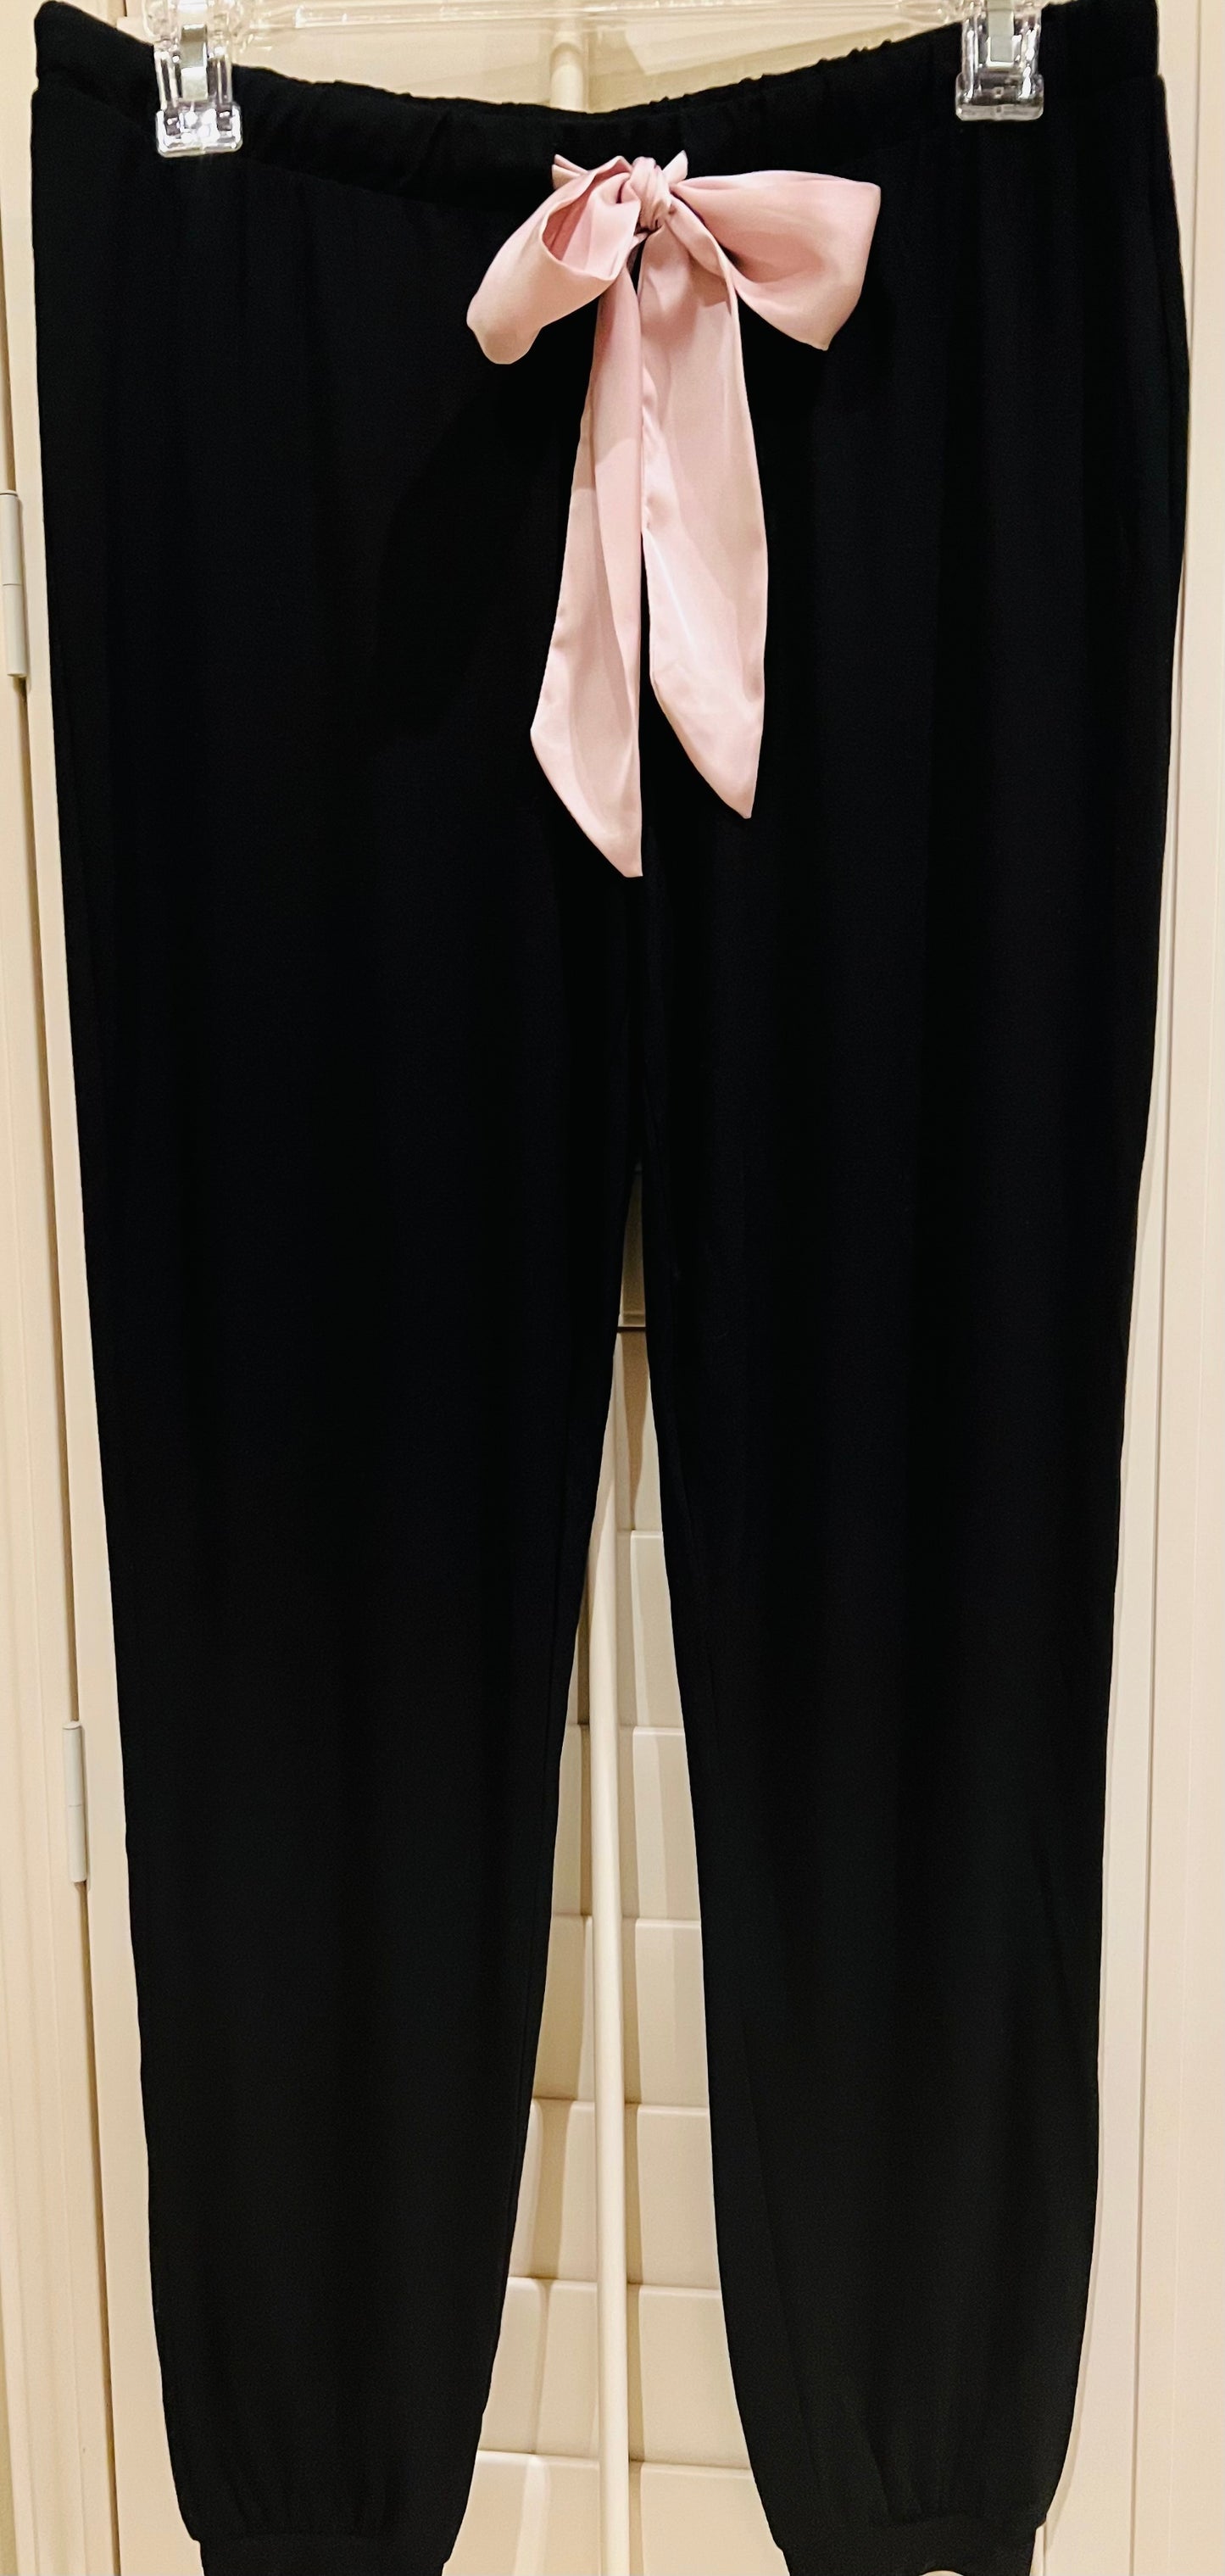 Pajama jogger style pant with pink stain ribbon-Small